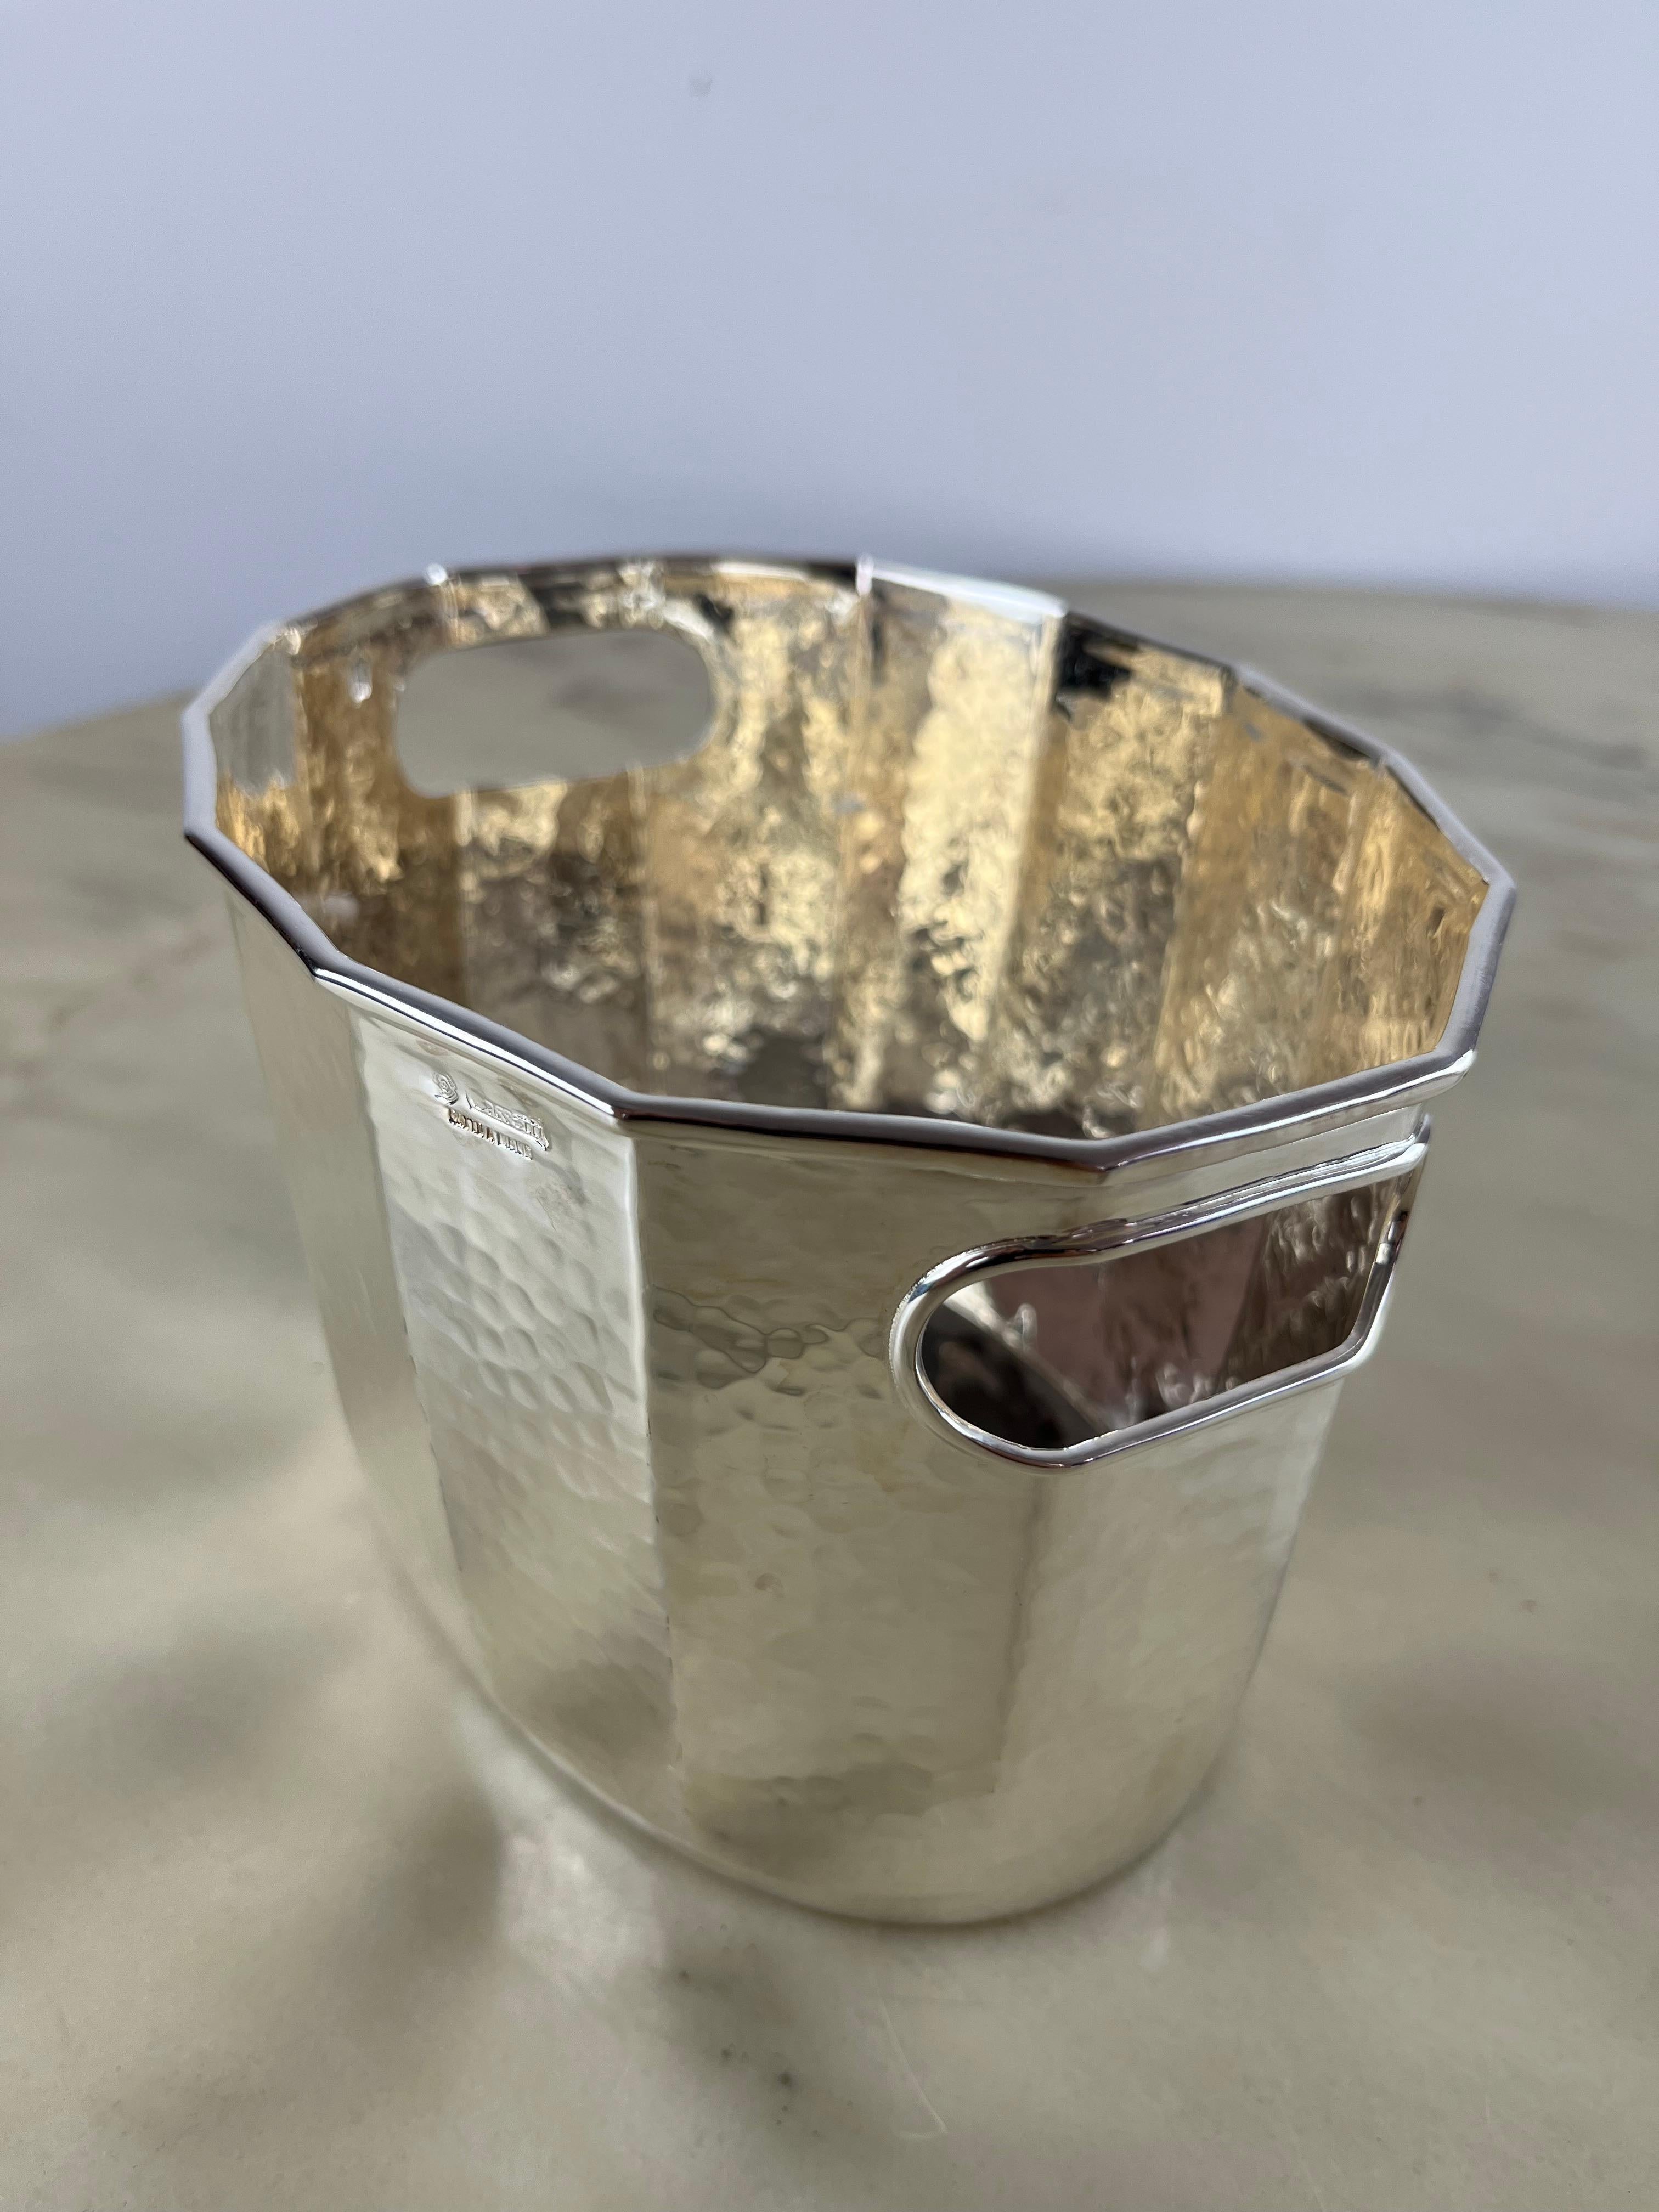 Silver plated ice bucket by Cassetti, made in Italy, 1980.
Handmade.
Small signs of the time.
Cassetti silverware was born in the 60s in Florence. He boasts collaborations with prestigious brands, Prada for example. He has created trophies for the